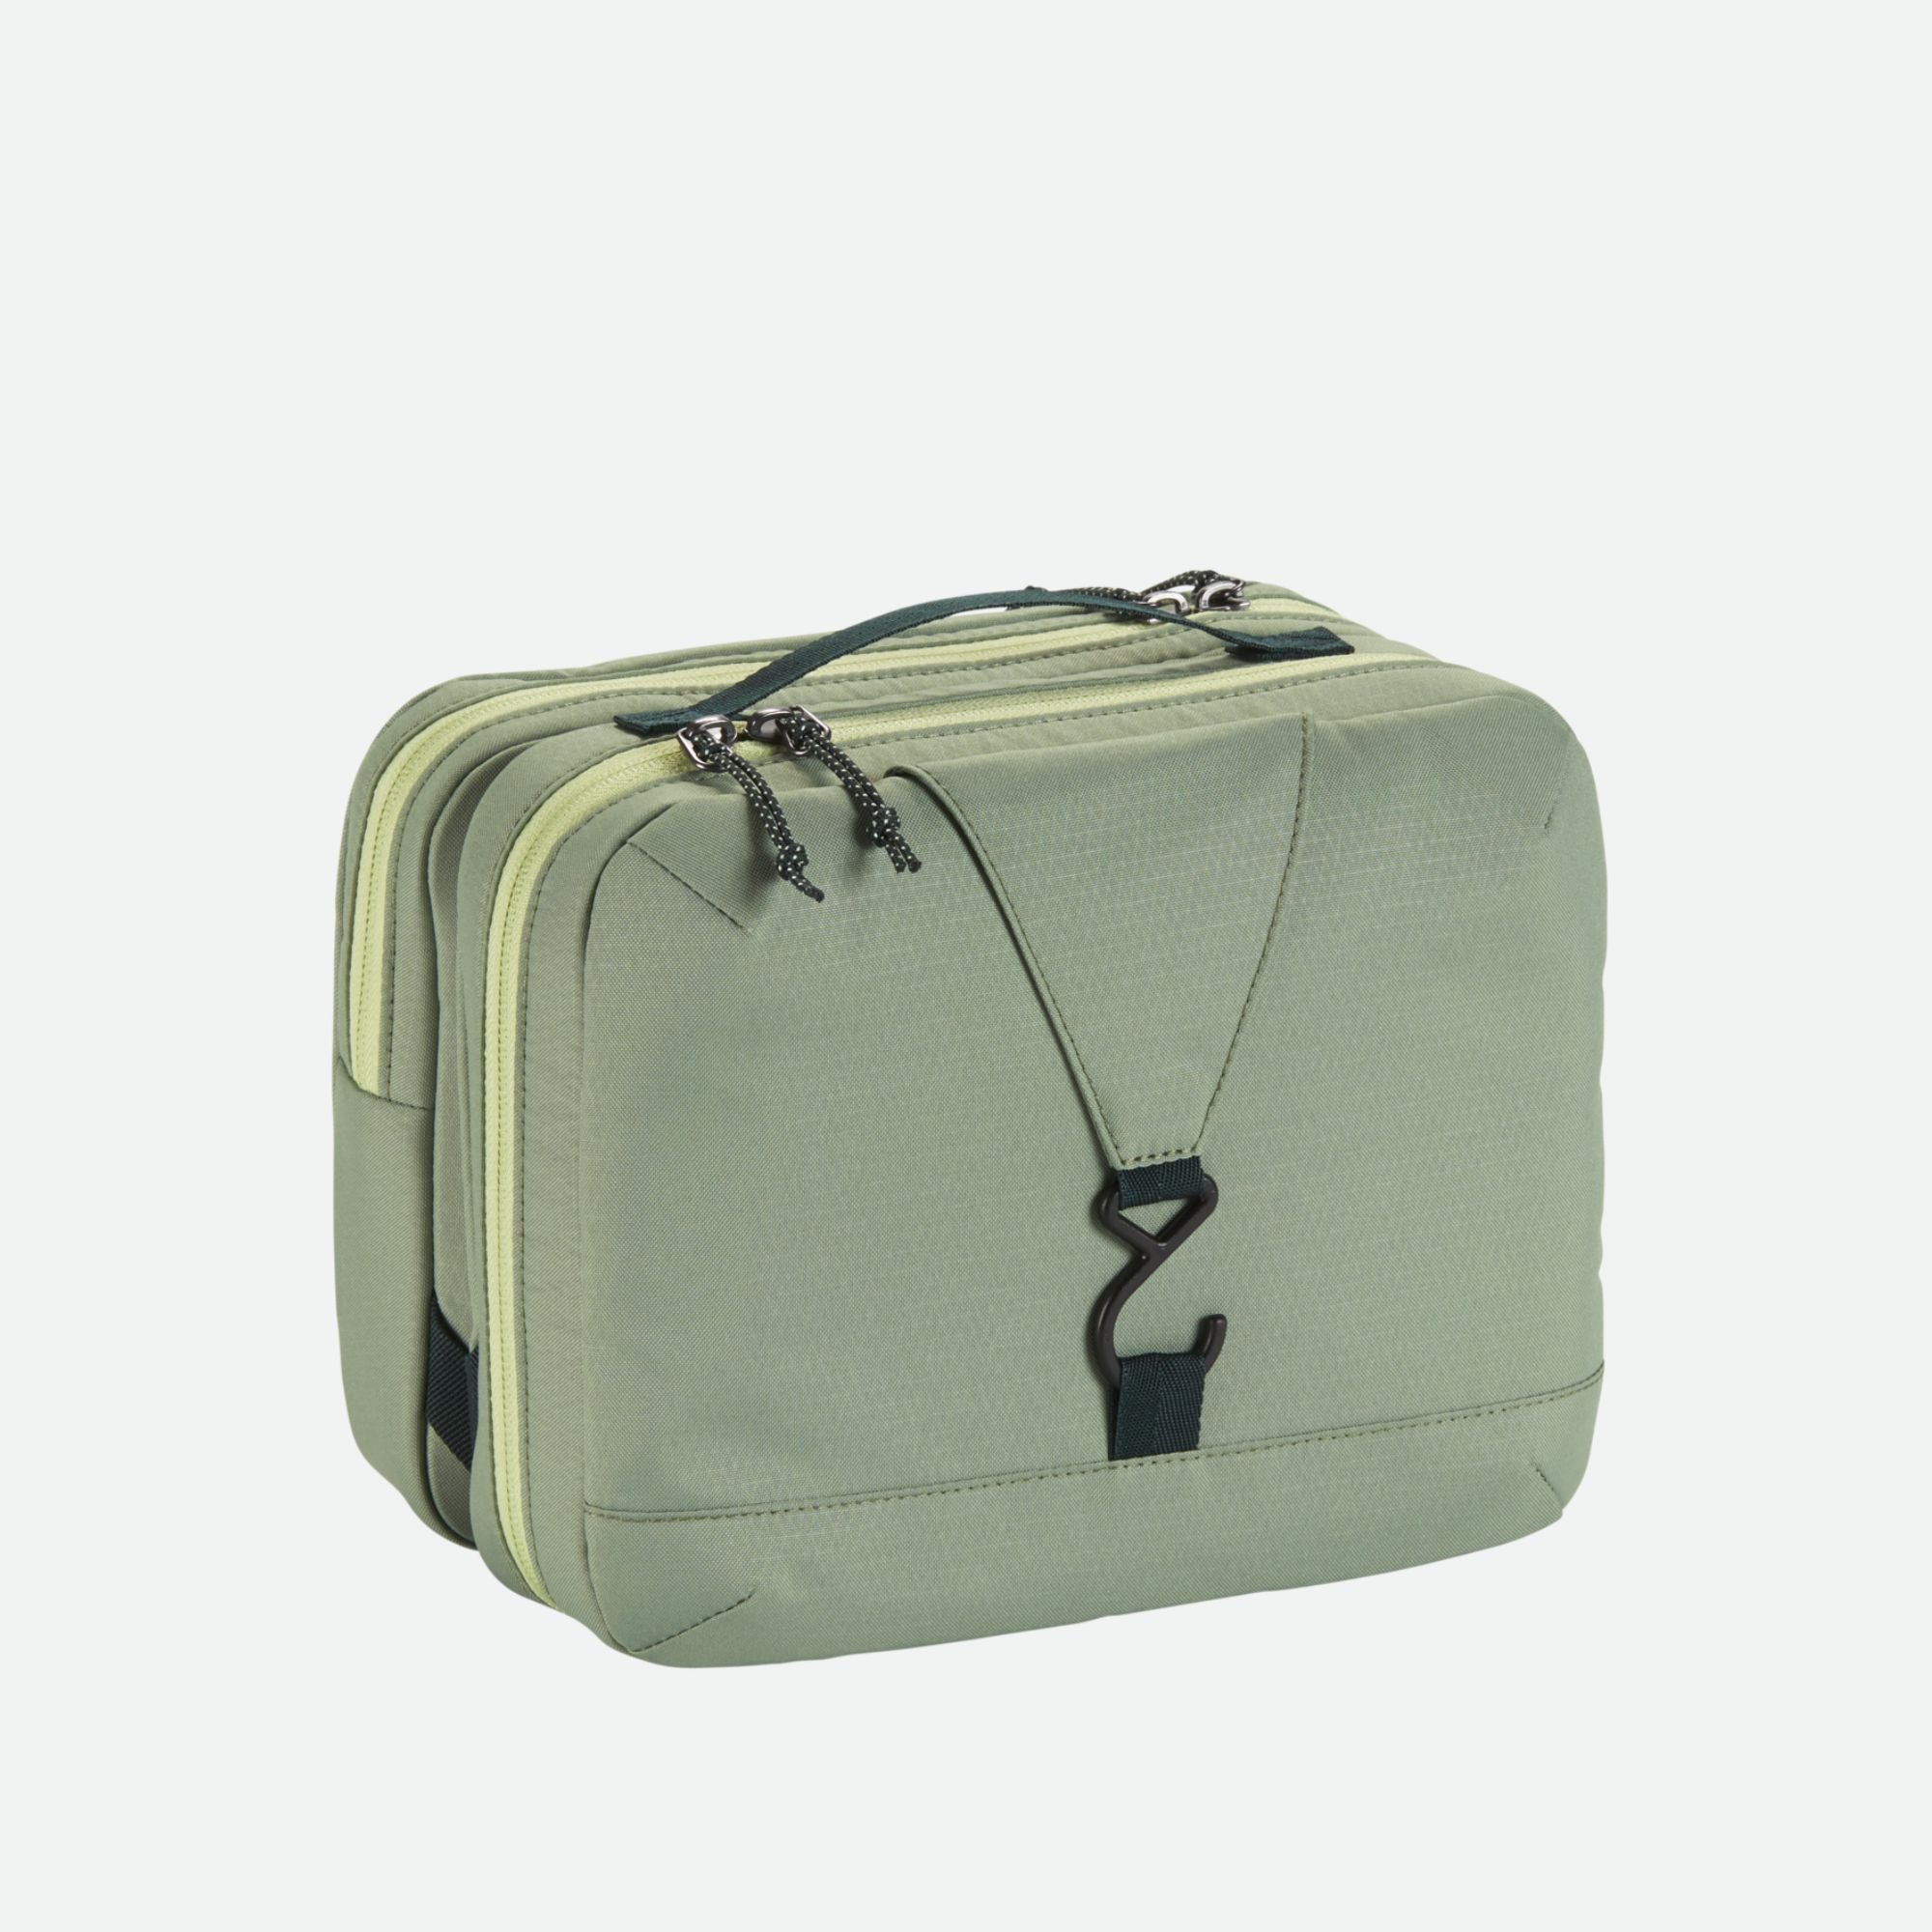 Eagle Creek Pack-It™ Reveal Trifold Toiletry Kit Mossy Green